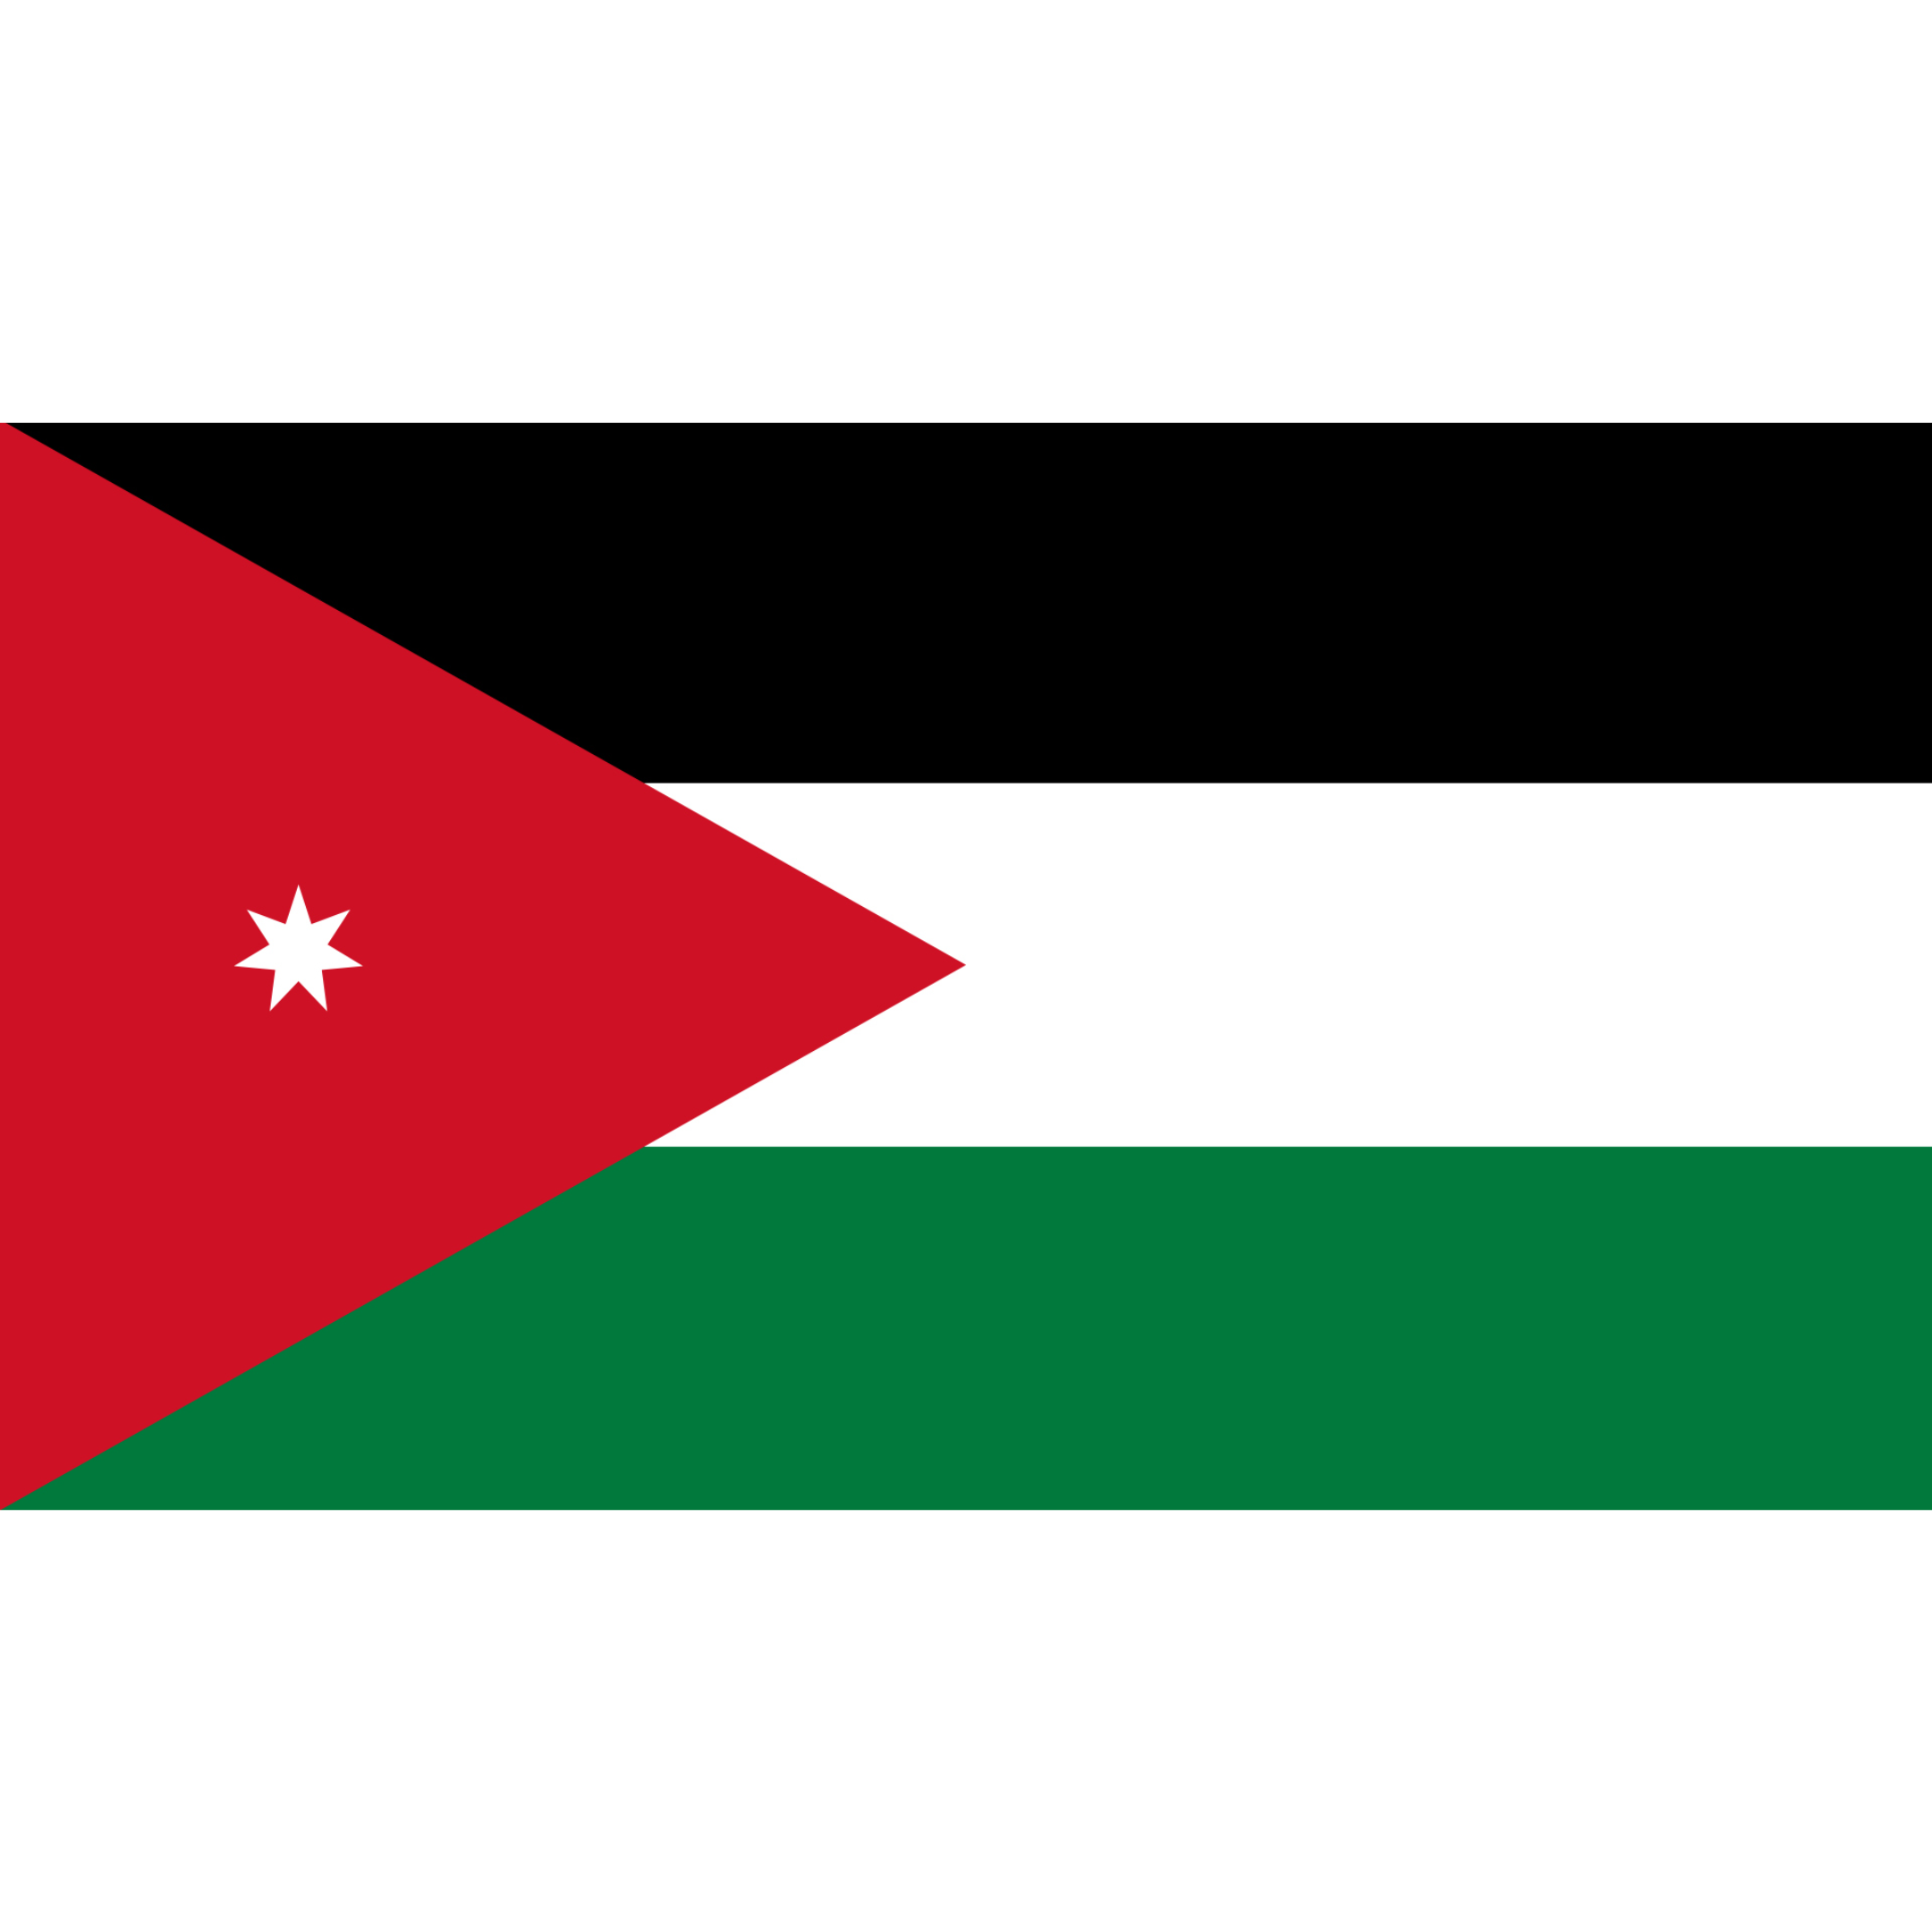 The flag of Jordan is made up of 3 horizontal black, white, and green bands, connected by a red chevron with a white star. 